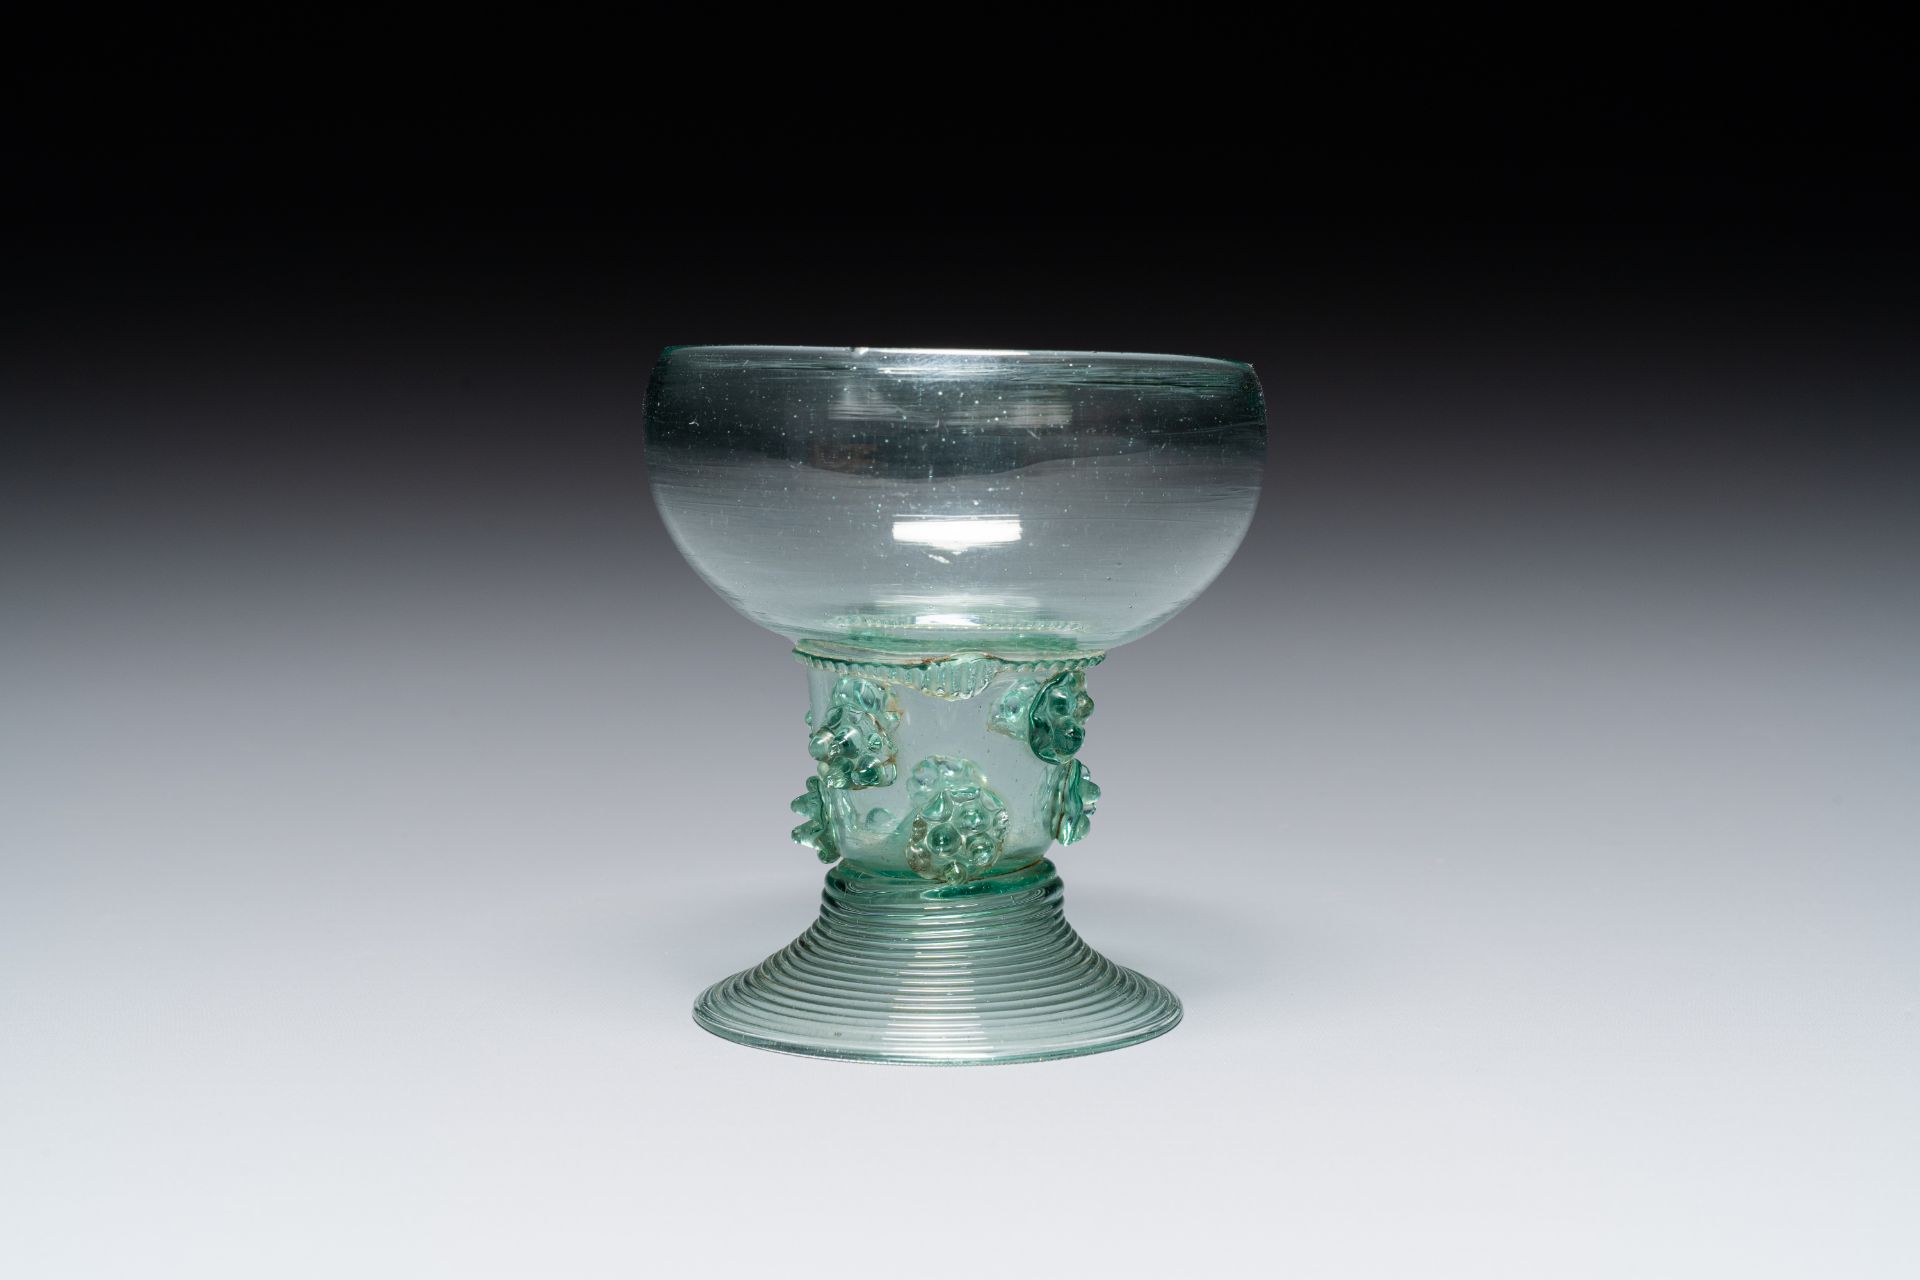 A Dutch or German green glass rummer, 2nd quarter of the 17th C. - Image 3 of 7